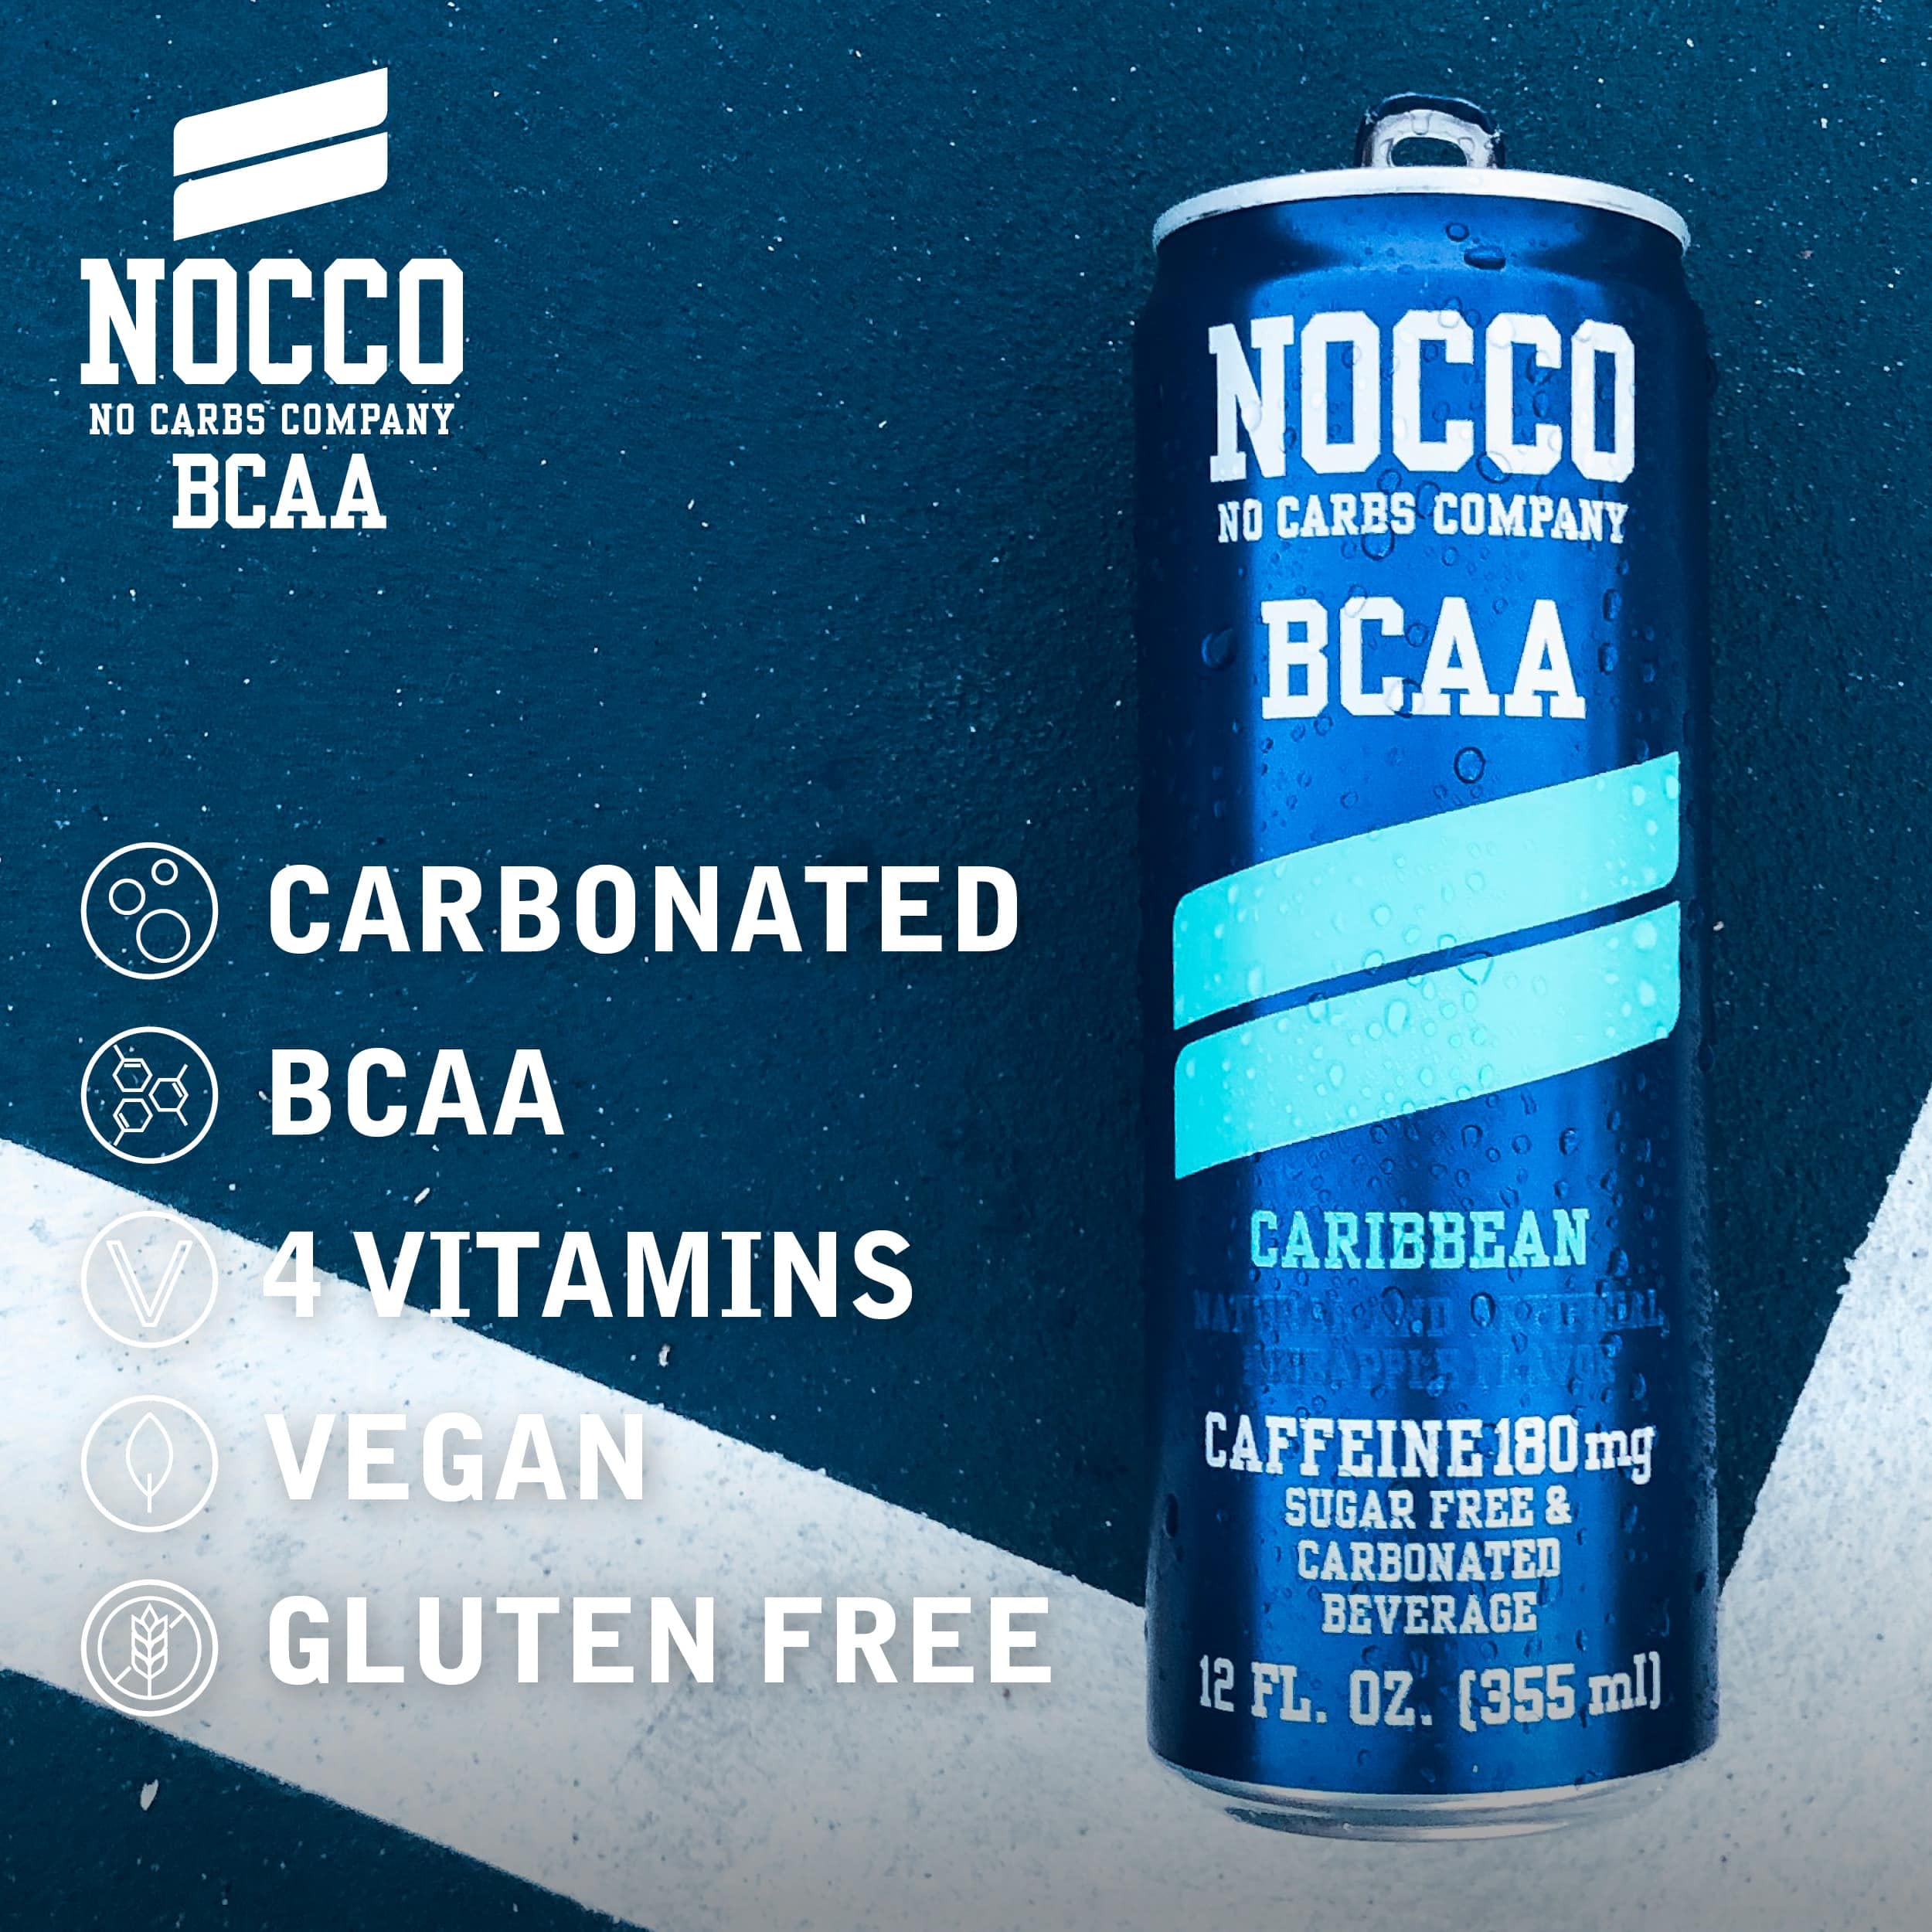 NOCCO BCAA Energy Drink Variety Pack - 12 Fl Oz (Pack of 12) - Sugar Free Caffeinated & Decaf Drink - Carbonated & Low Calorie with BCAAs, Vitamin B6, B12, & Biotin - Grab & Go Performance Drinks